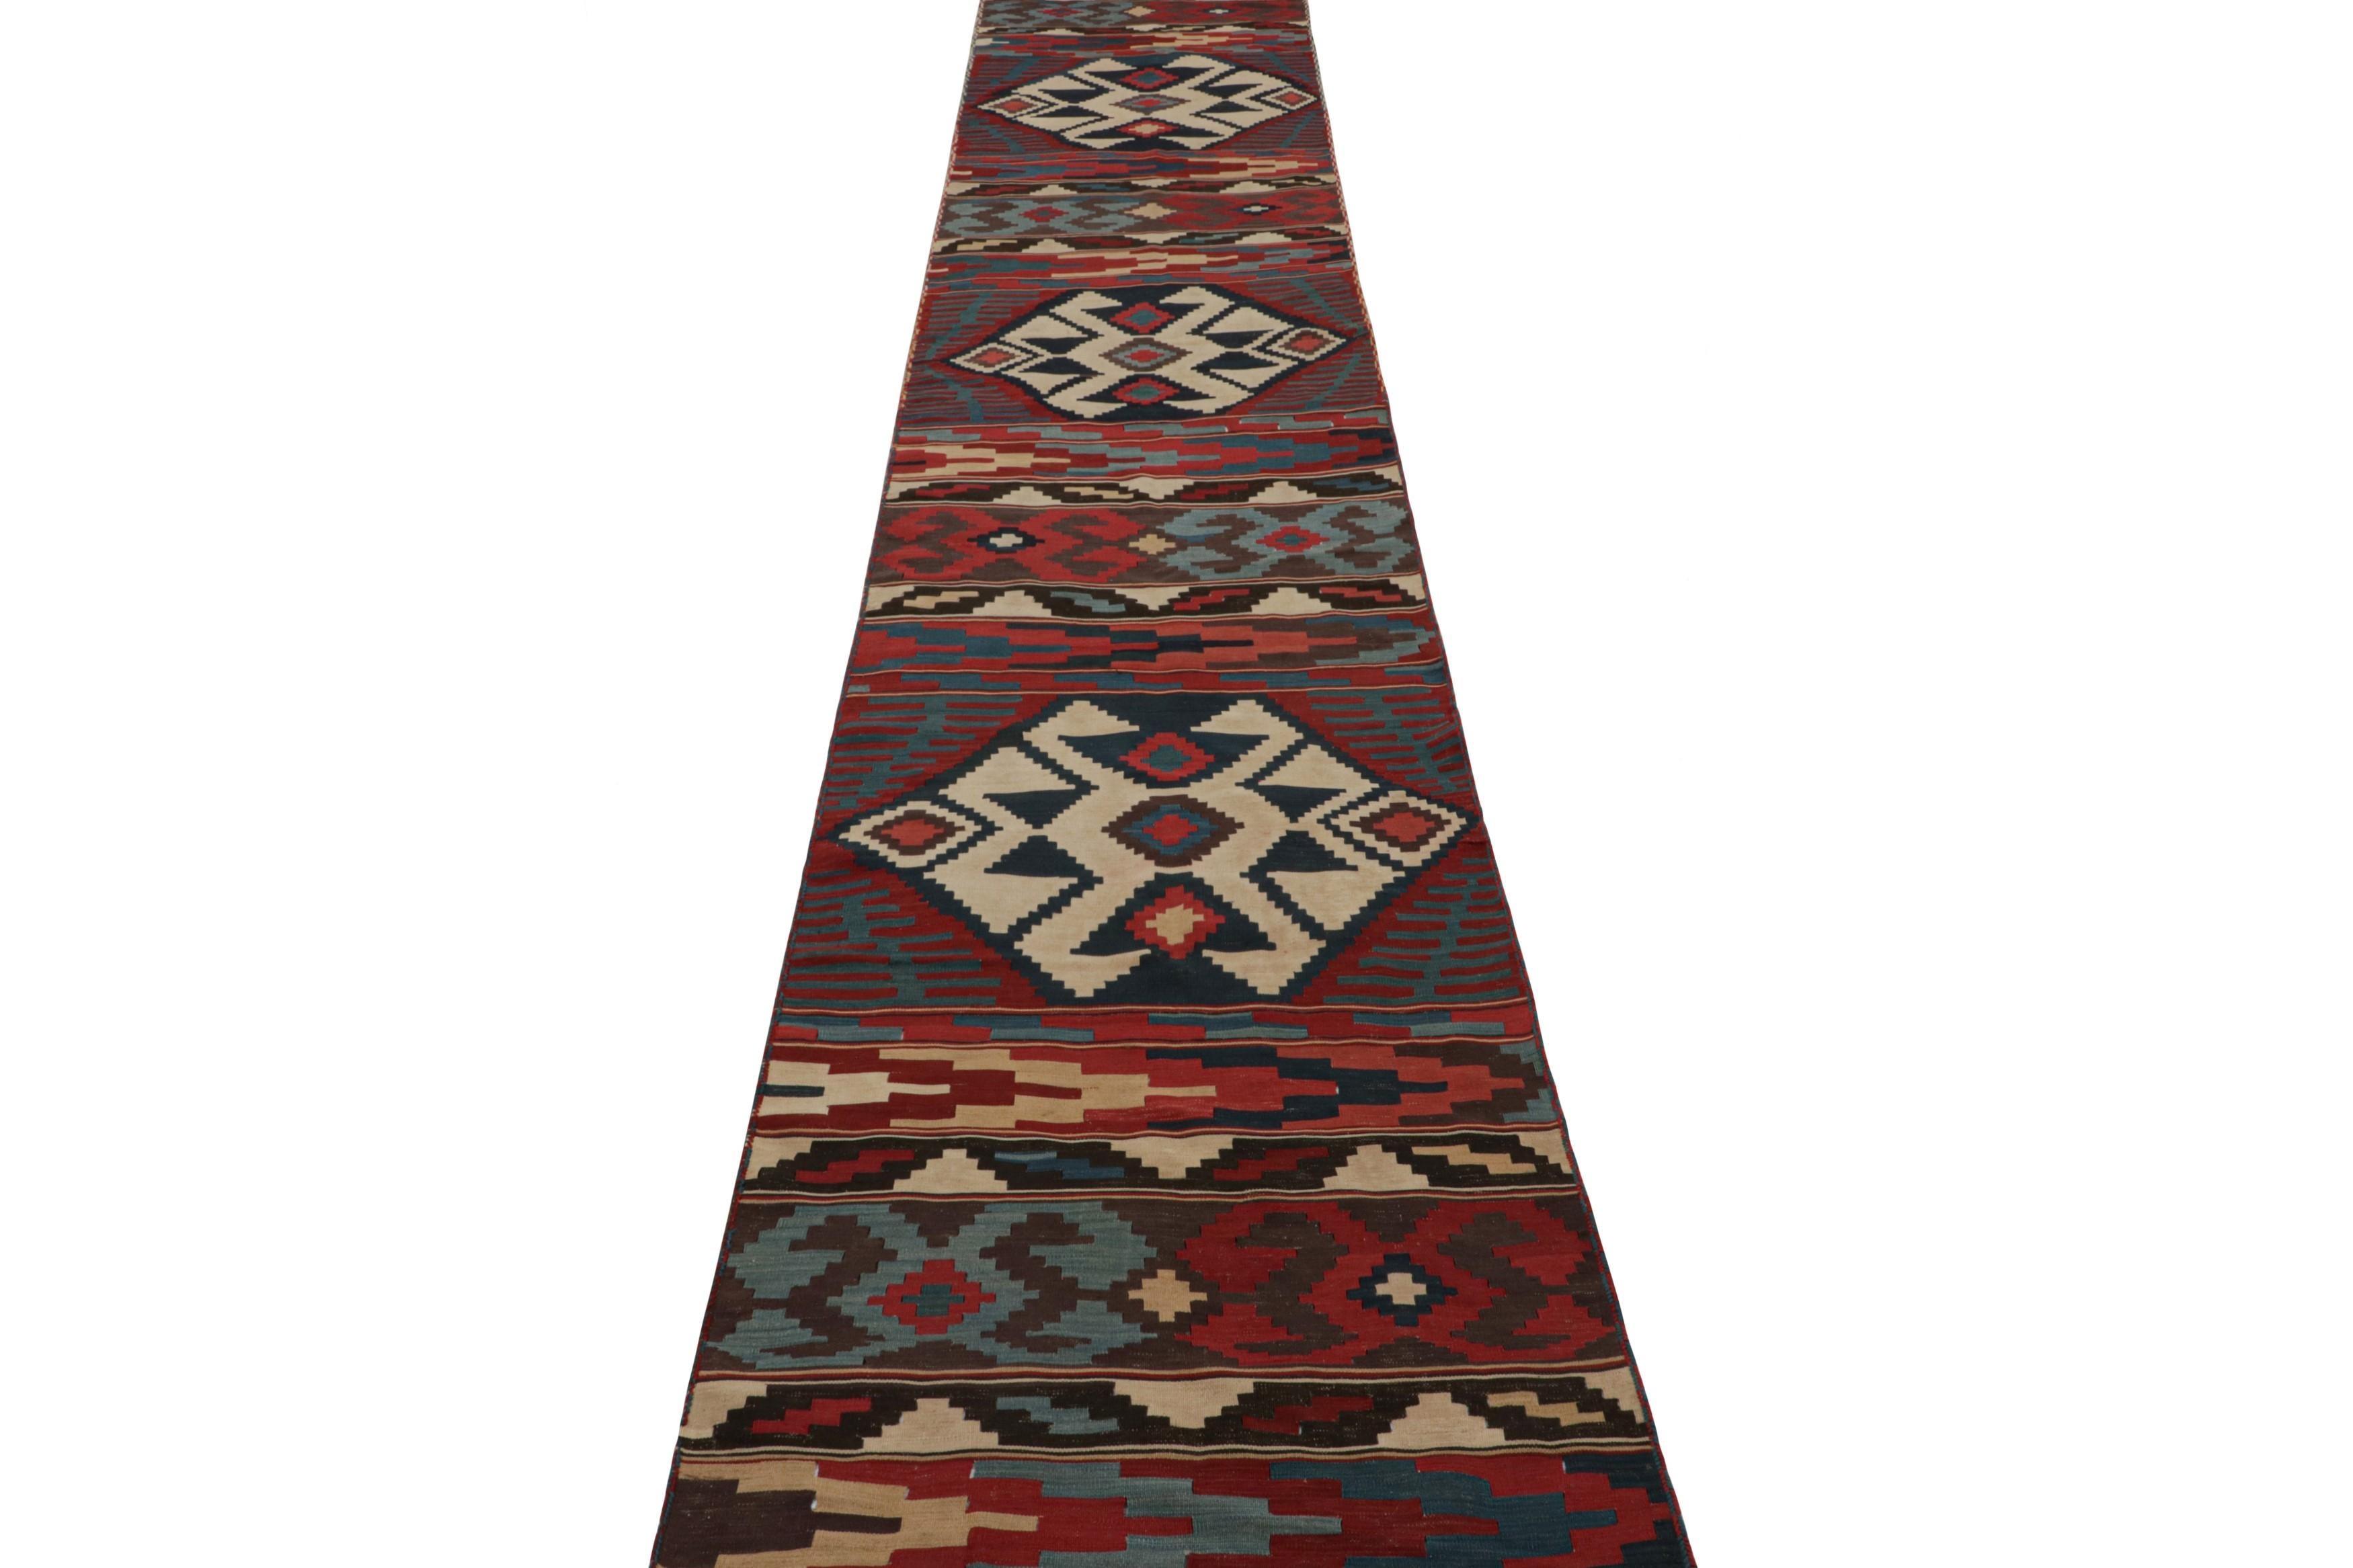 Tribal Twin Vintage Persian Kilim Runner Rugs with Geometric Patterns, from Rug & Kilim For Sale